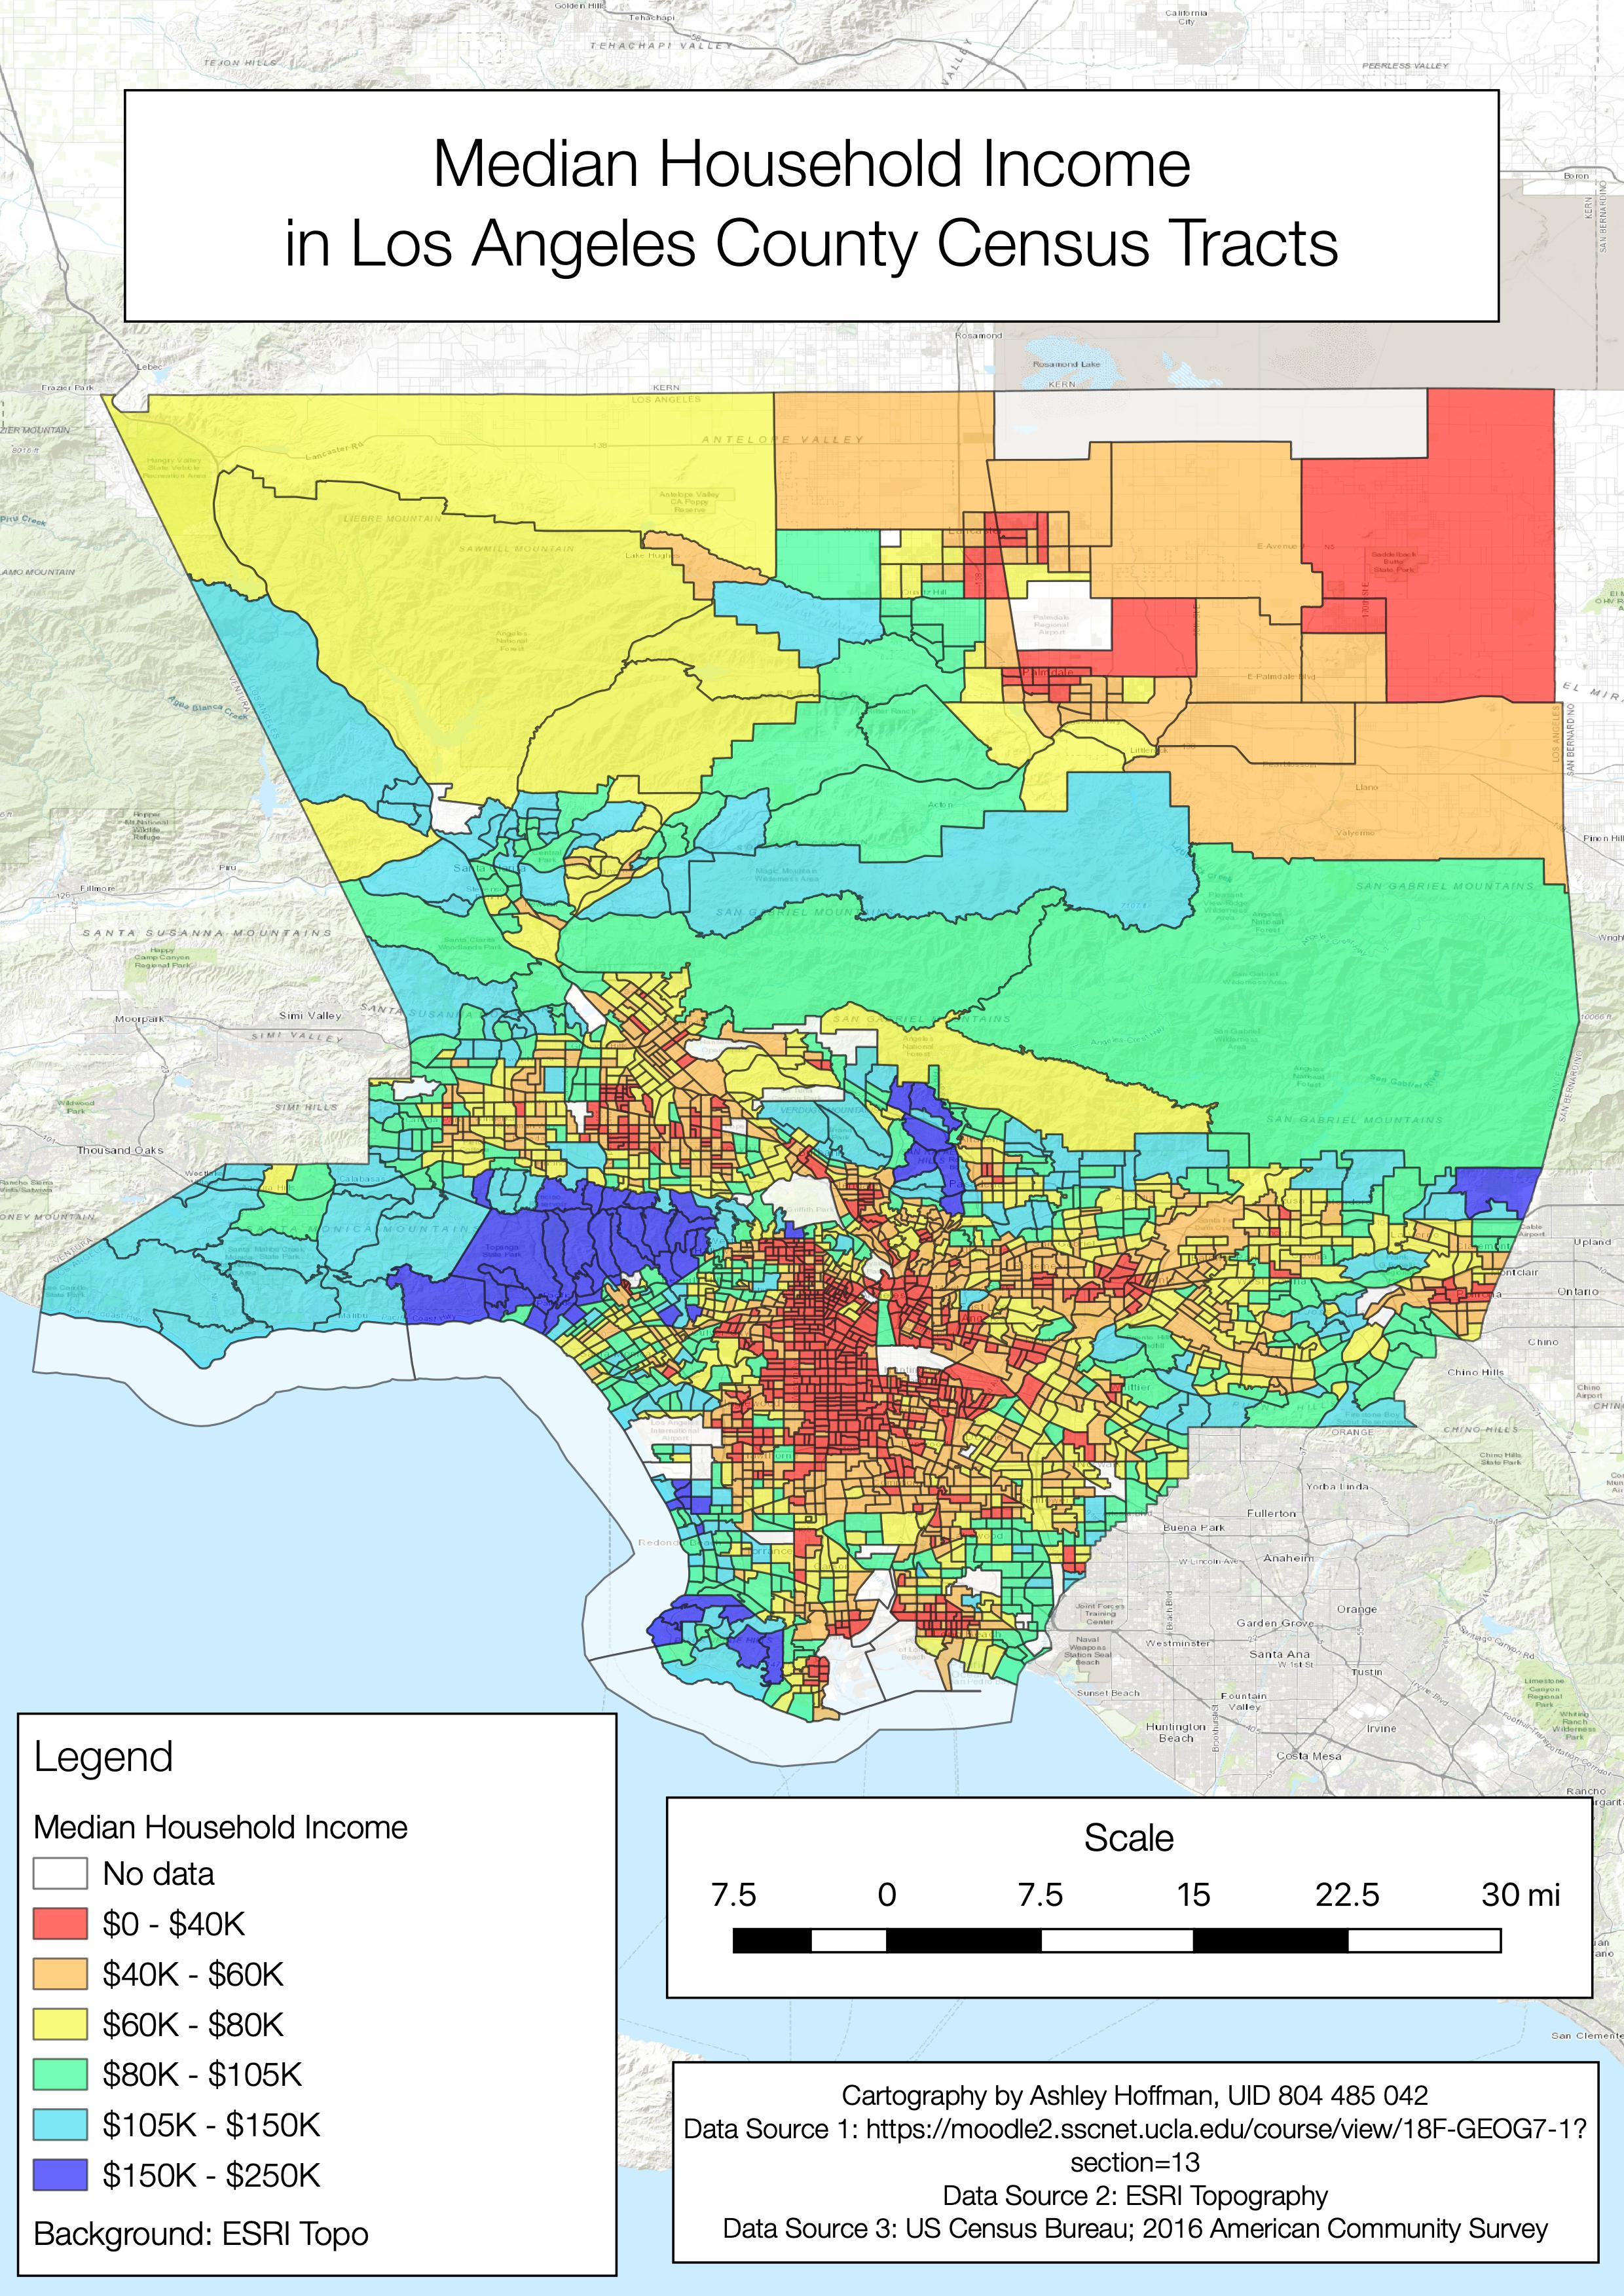 Median Household Income in each Los Angeles Census Tract